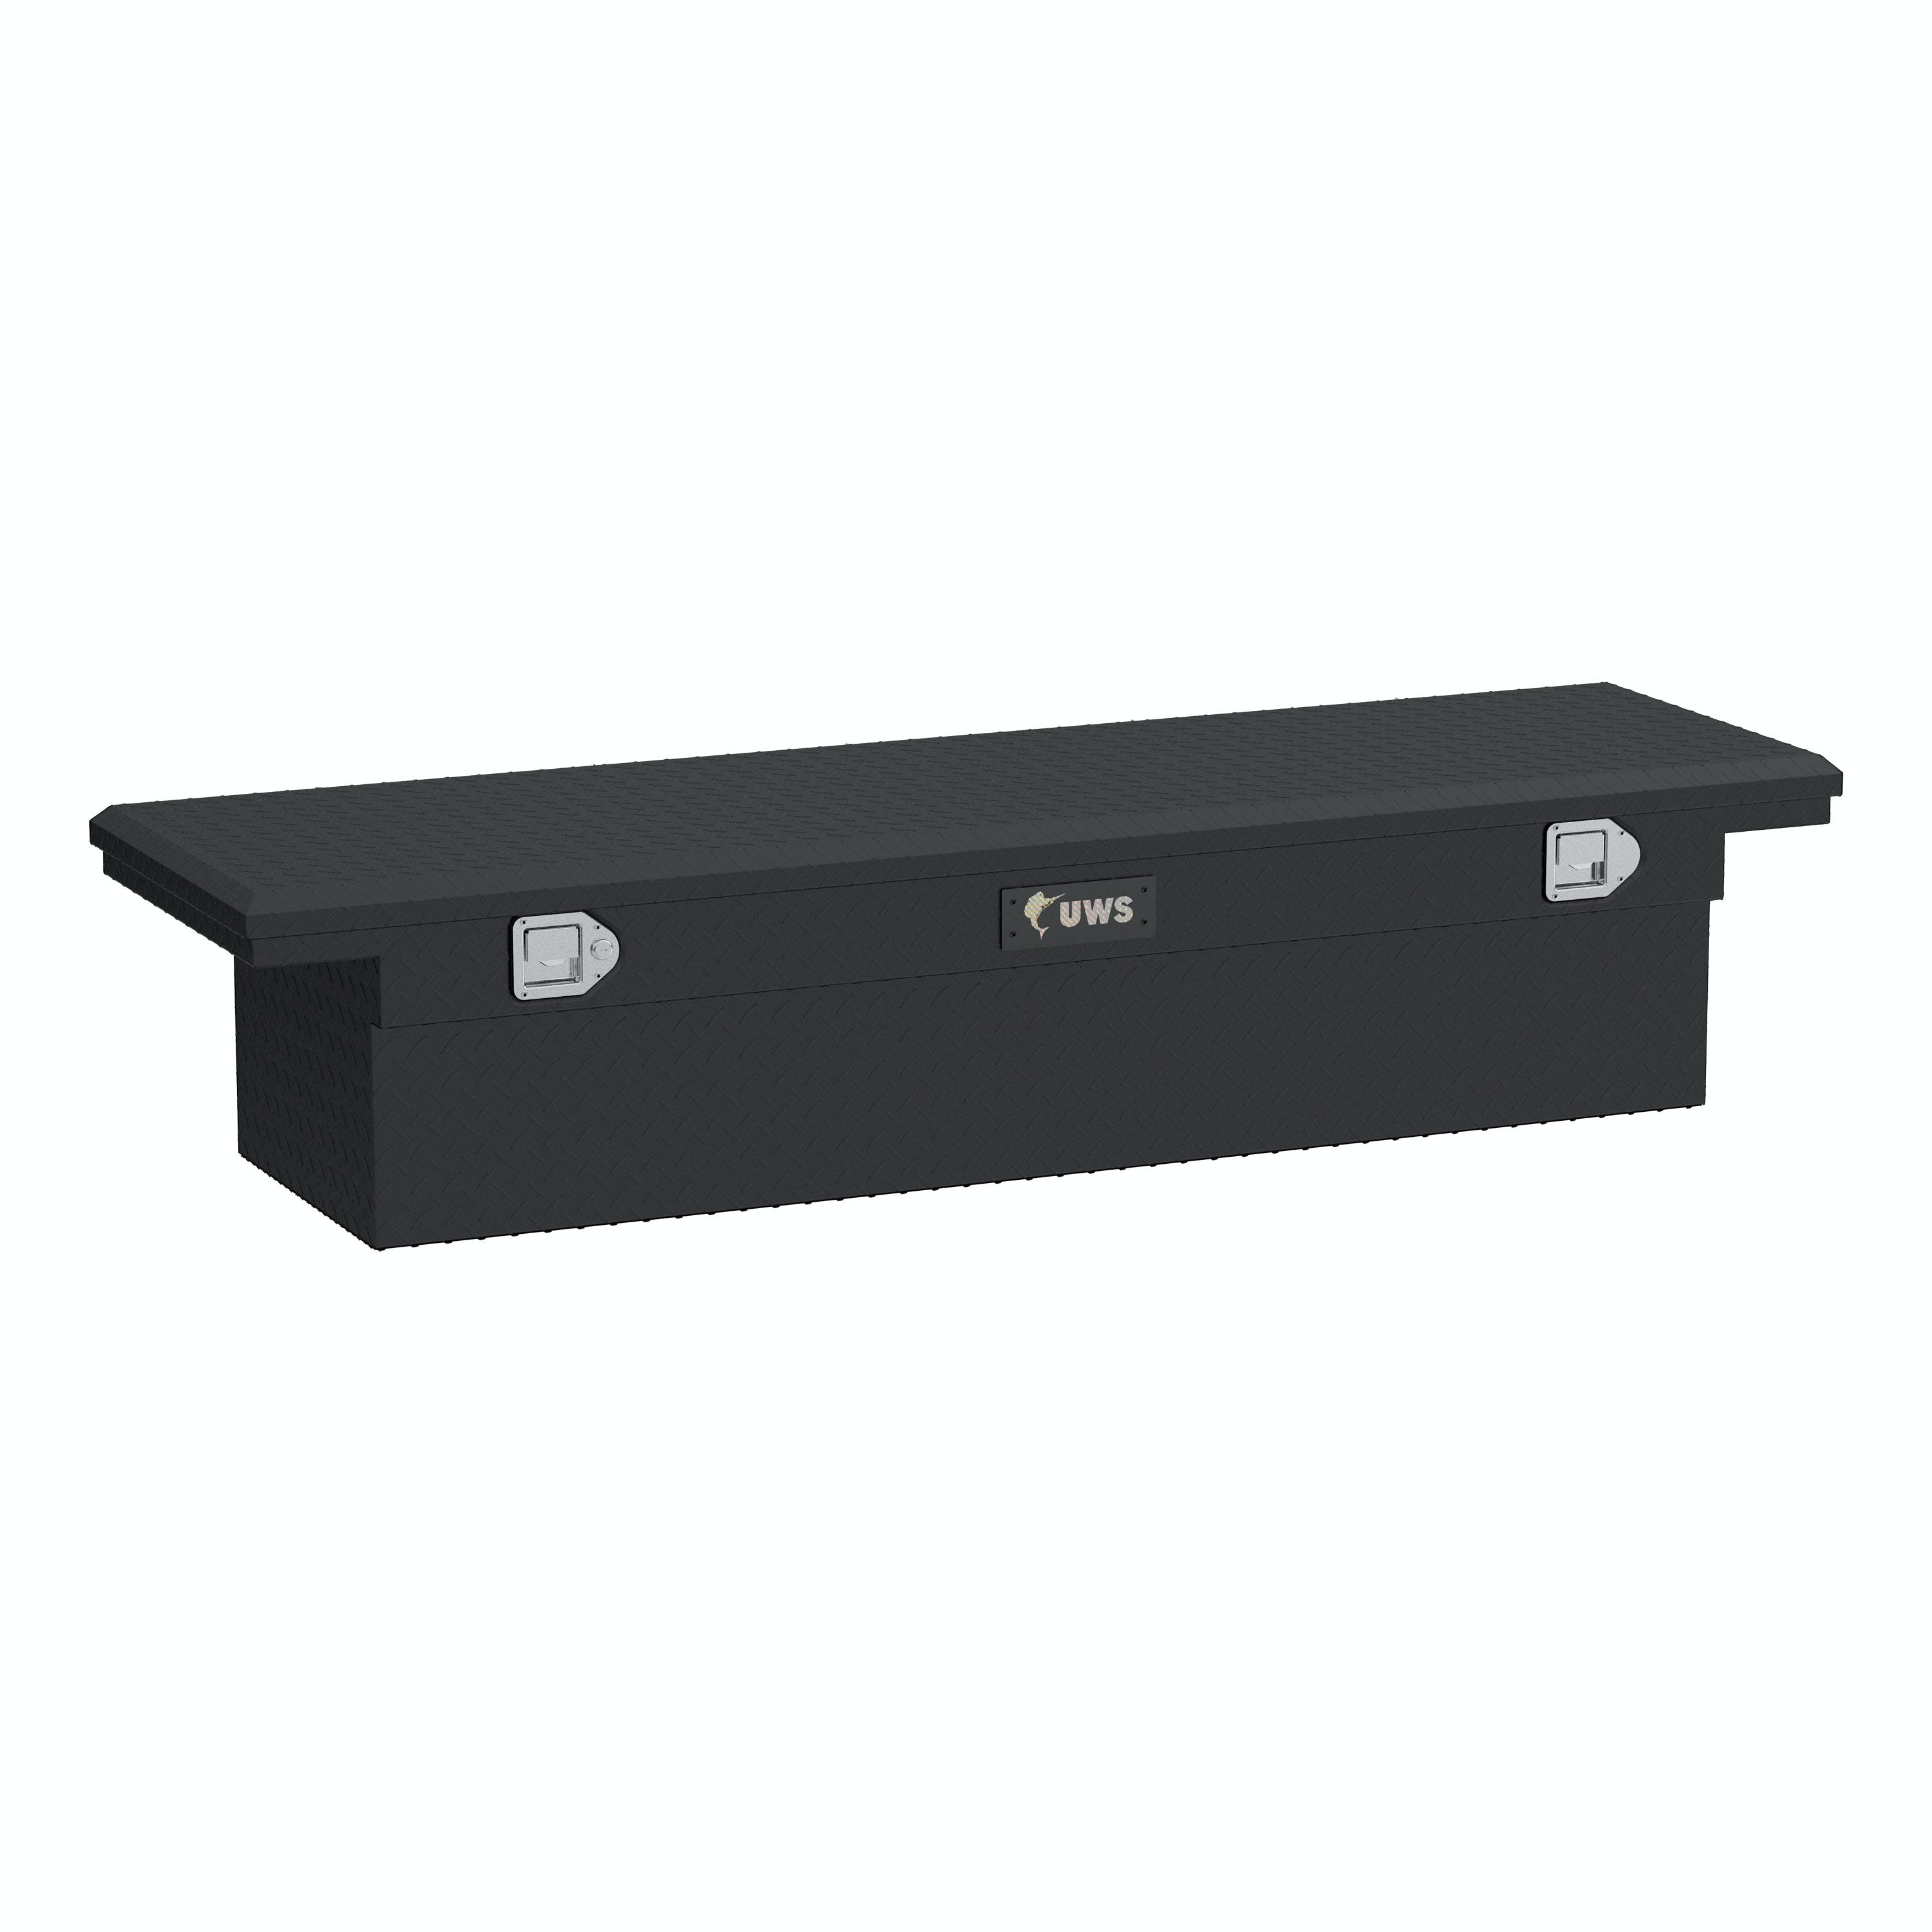 UWS TBS-69-LP-MB 69 inch Aluminum Single Lid Crossover Toolbox Low Profile Matte Black